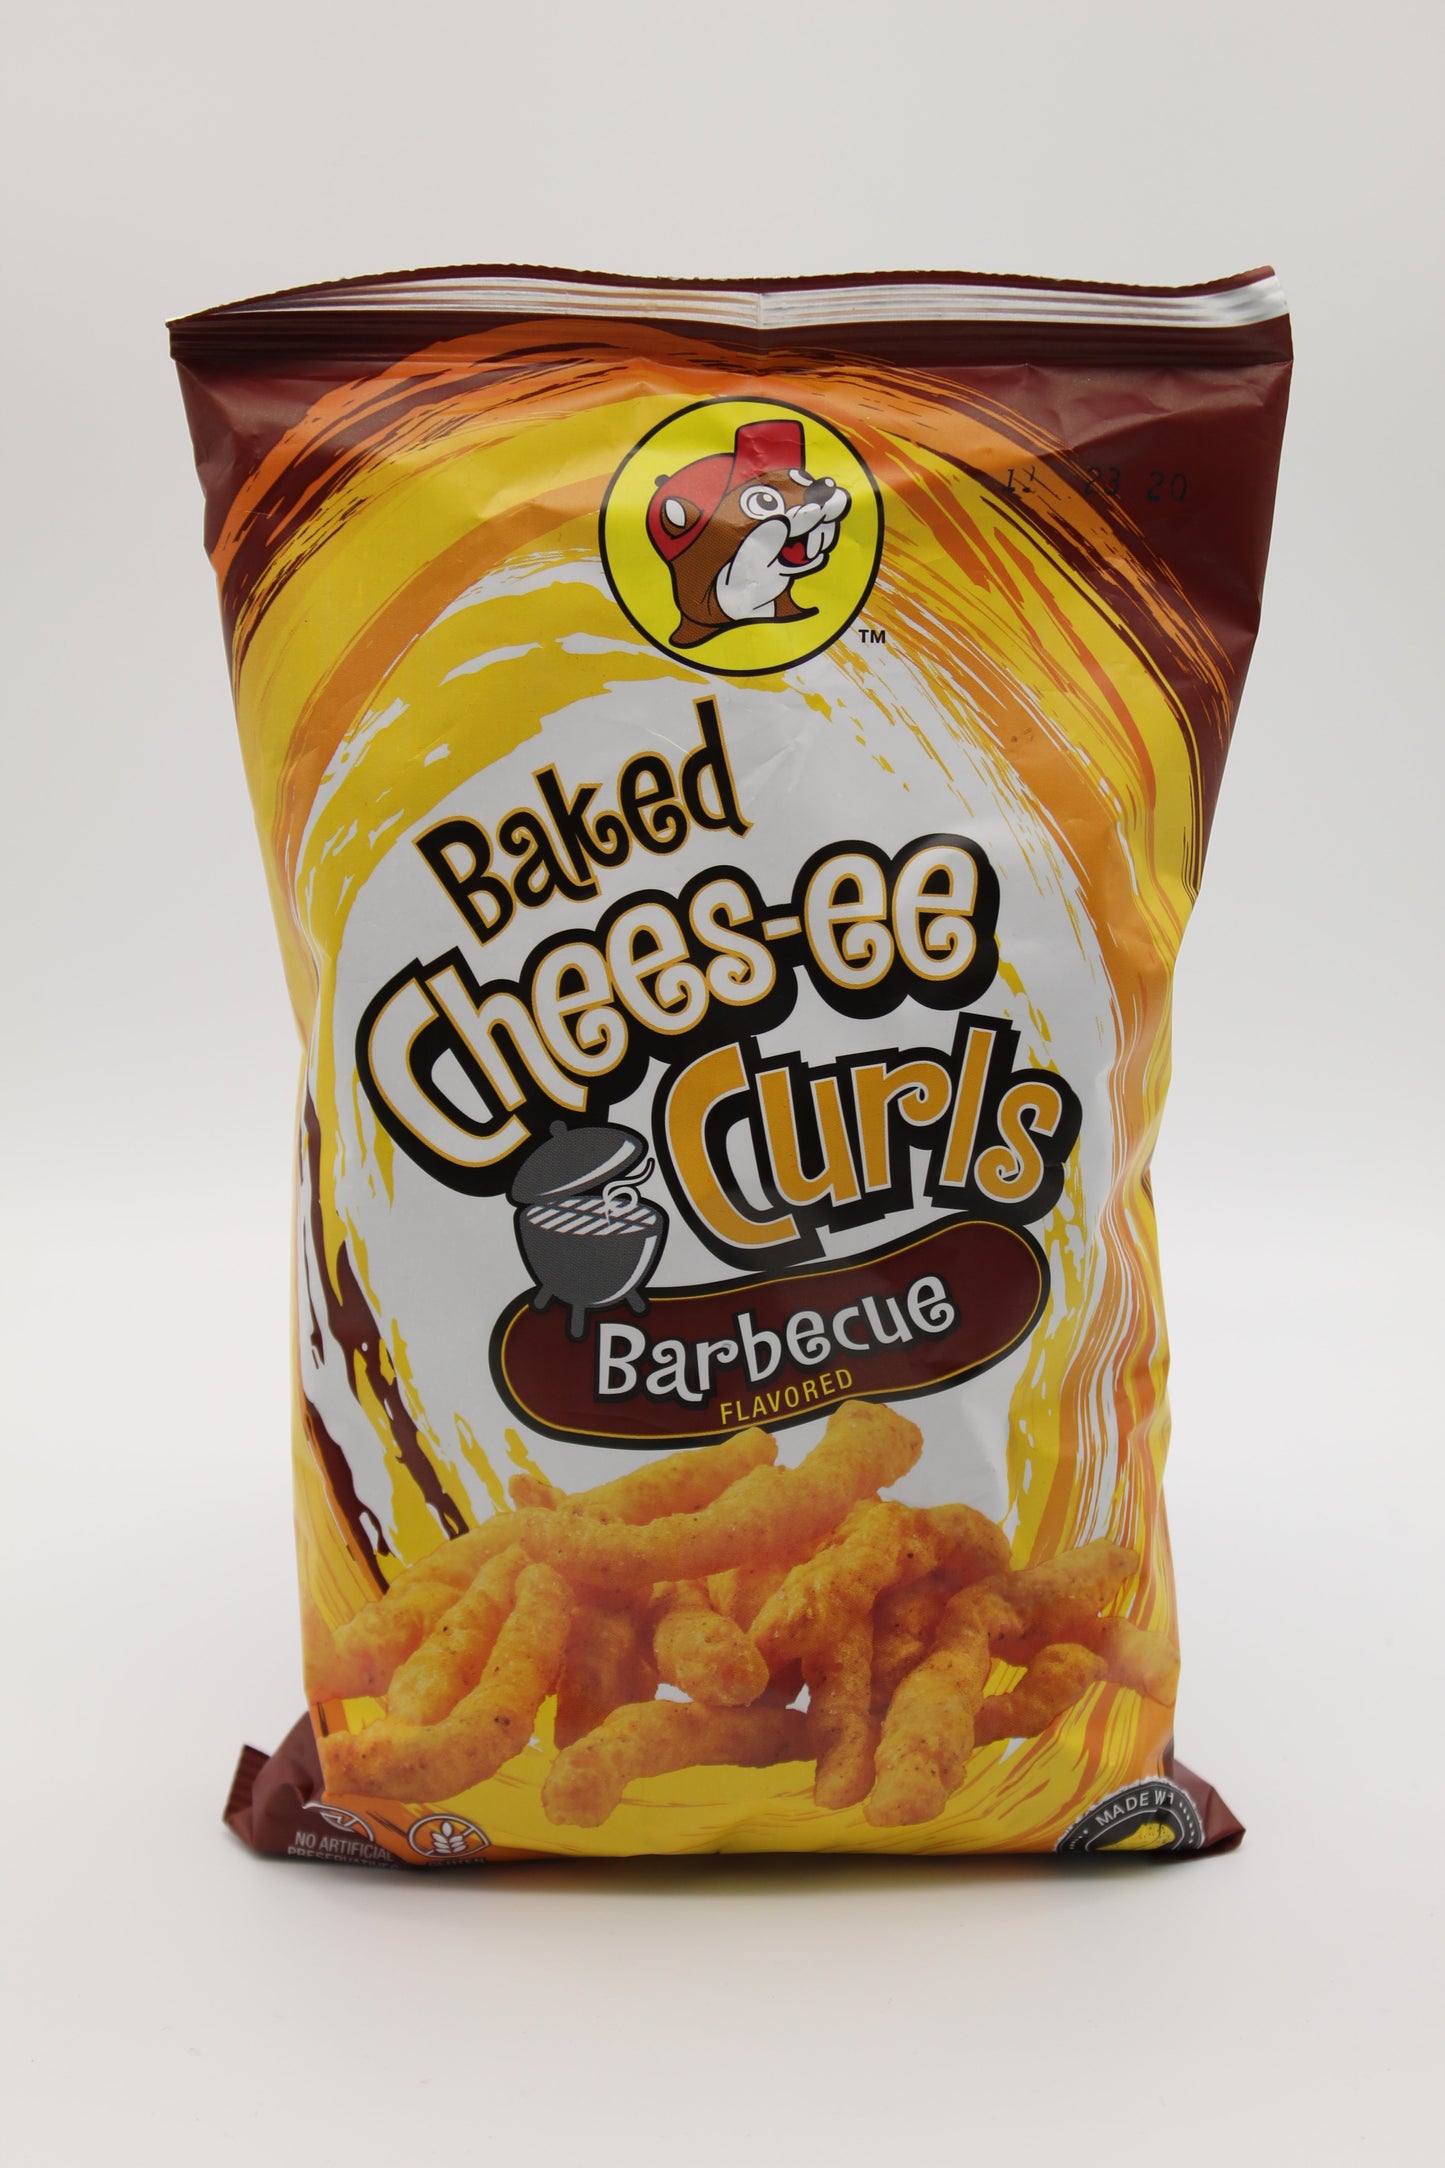 Baked Chees-ee Curls - BBQ